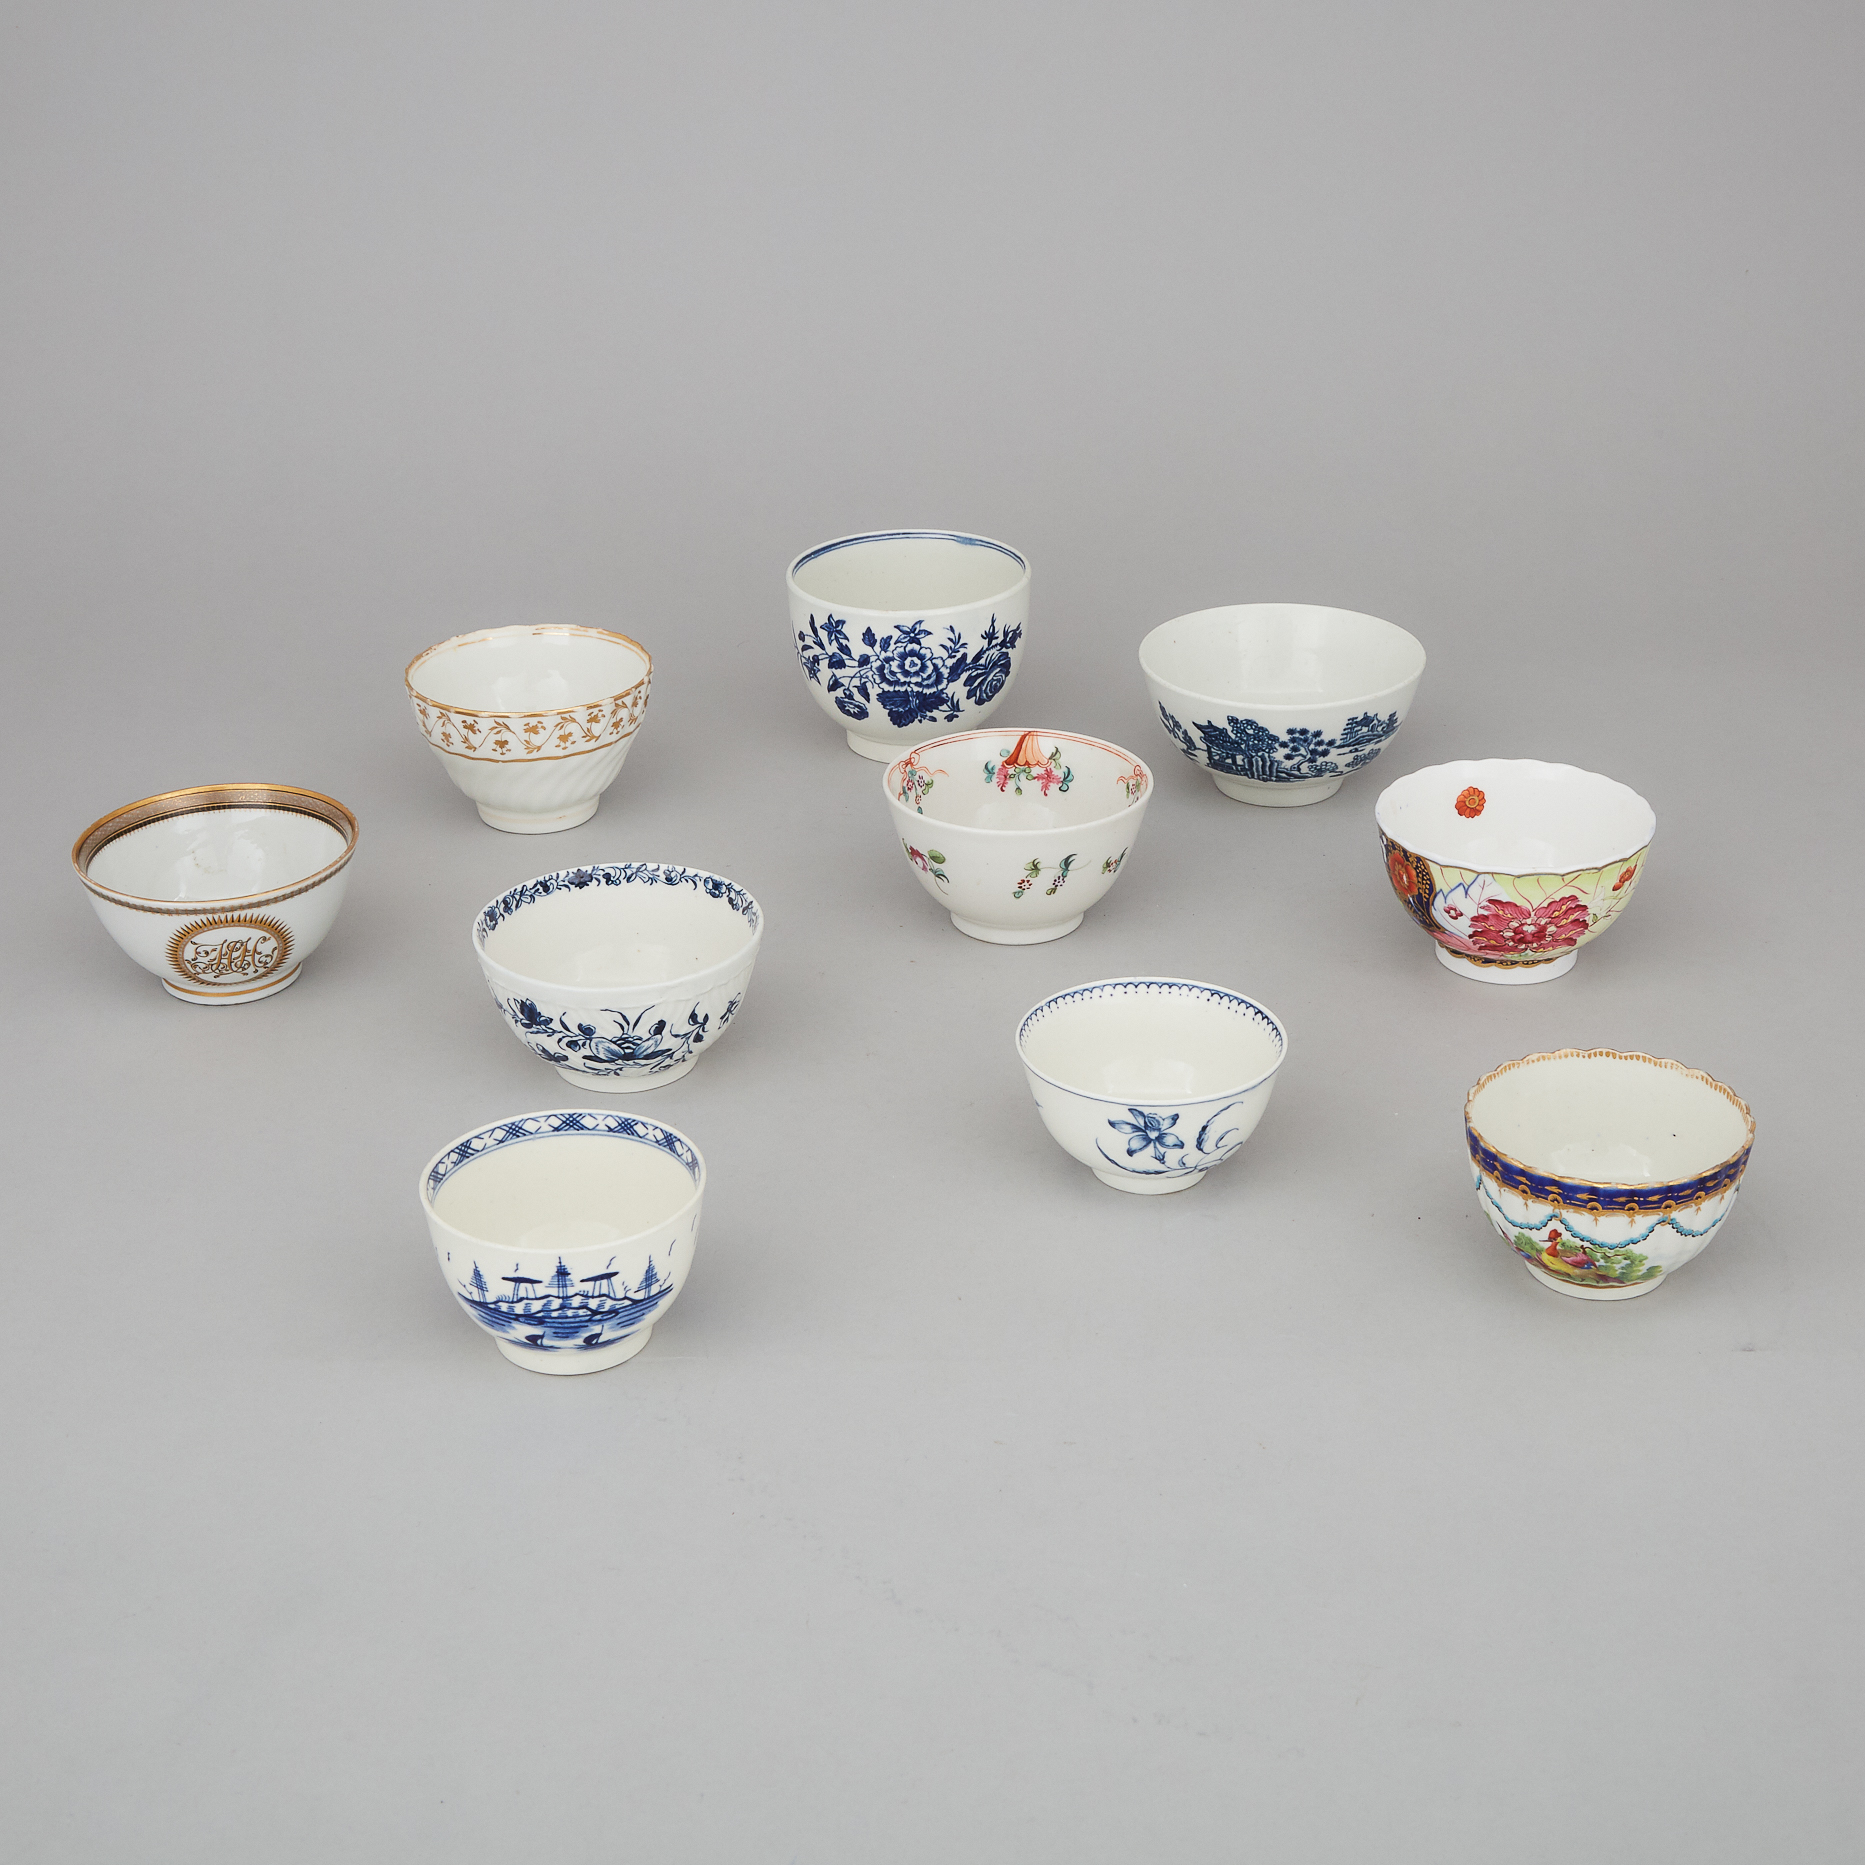 Ten Mainly English Porcelain Tea Bowls and Sugar Basins, late 18th/ early 19th century